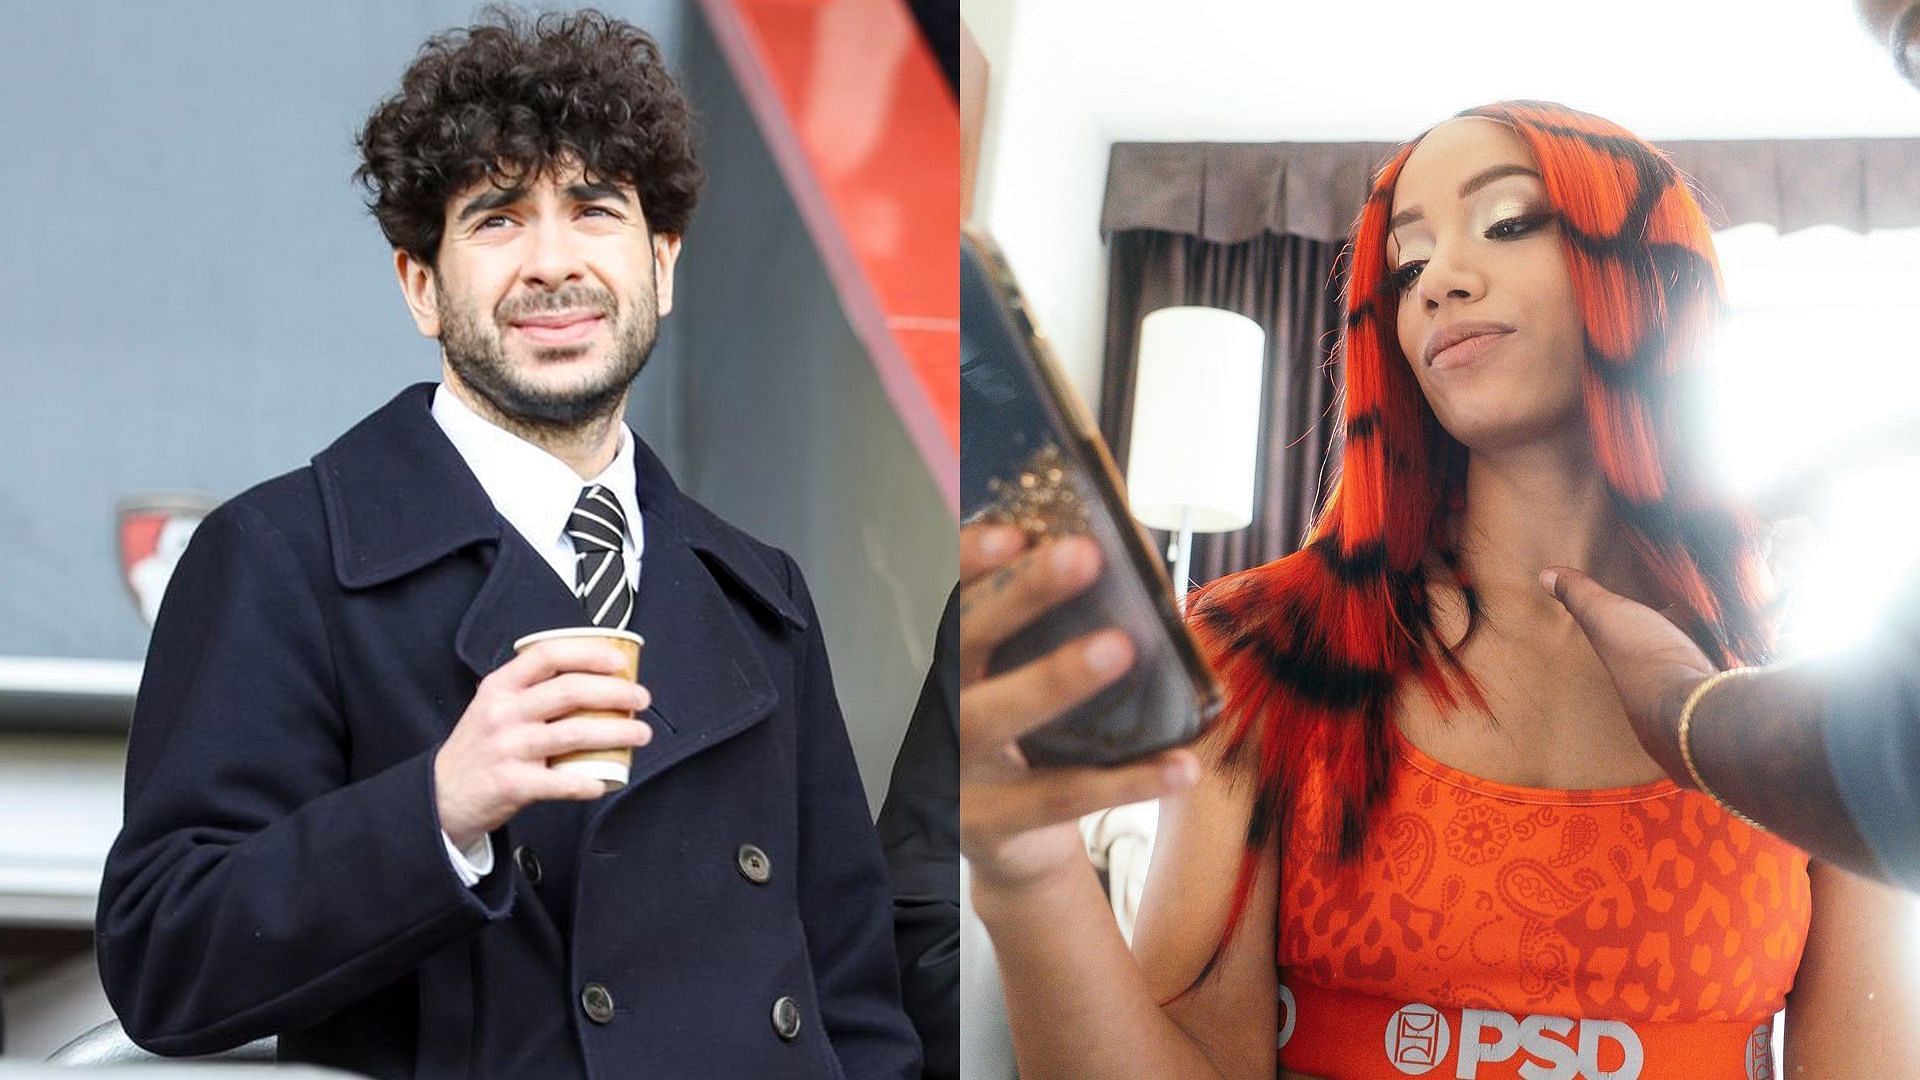 Tony Khan has reportedly signed Mercedes Mone to AEW